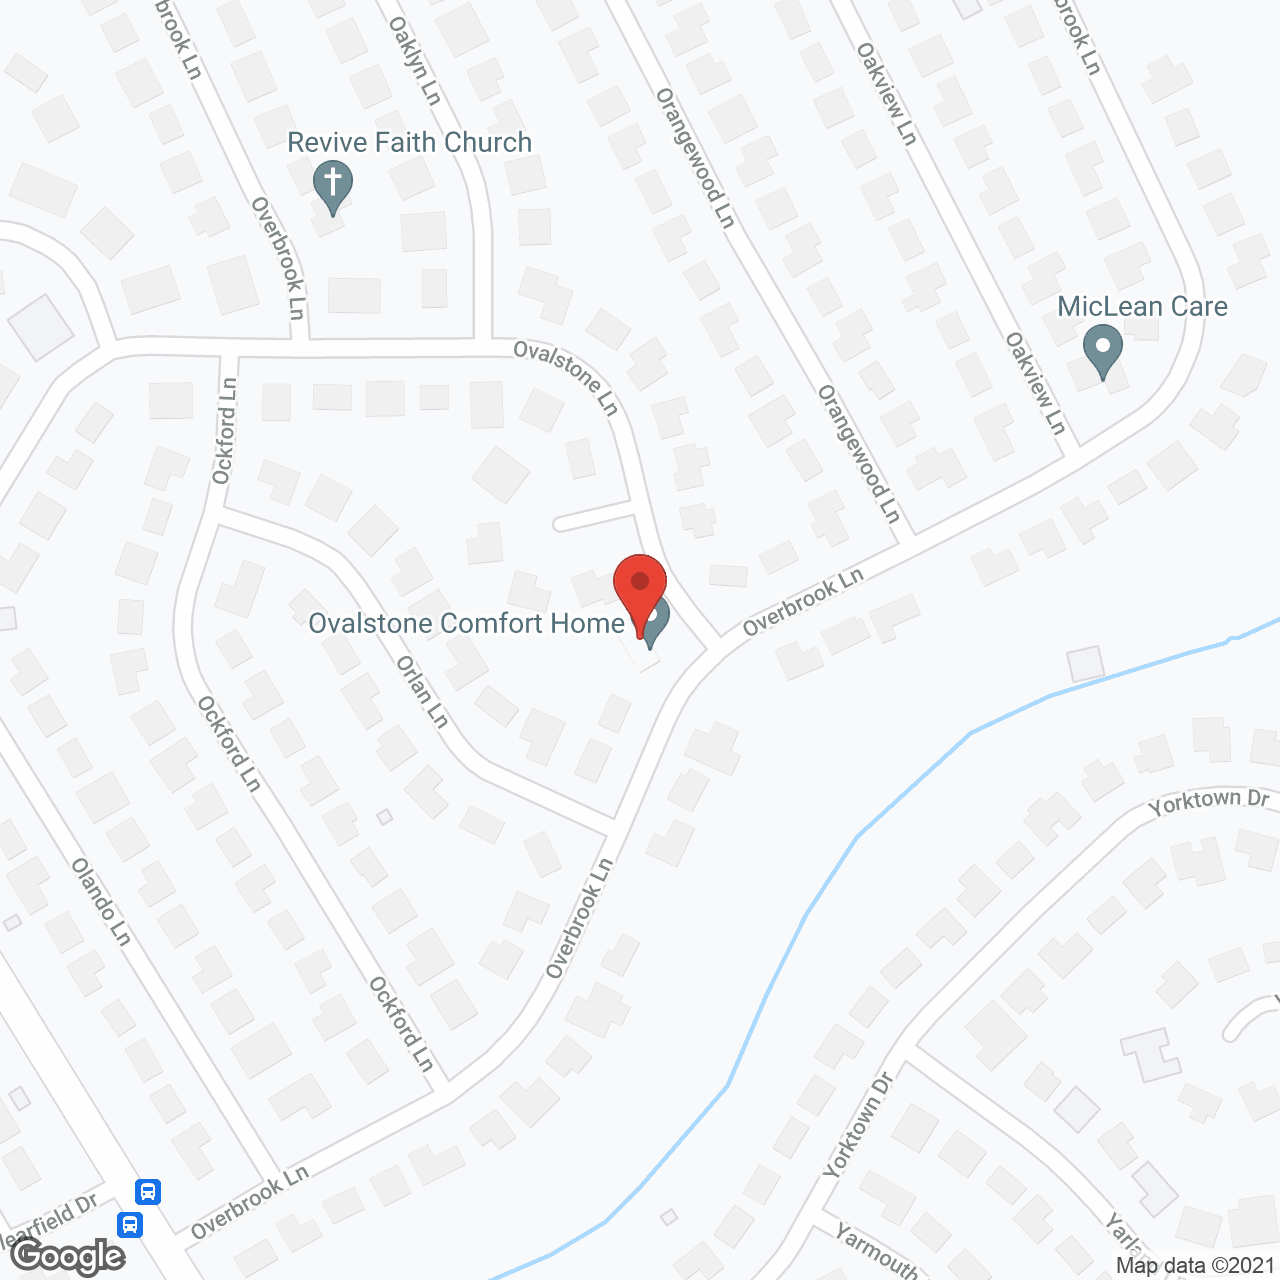 Ovalstone Comfort Home in google map